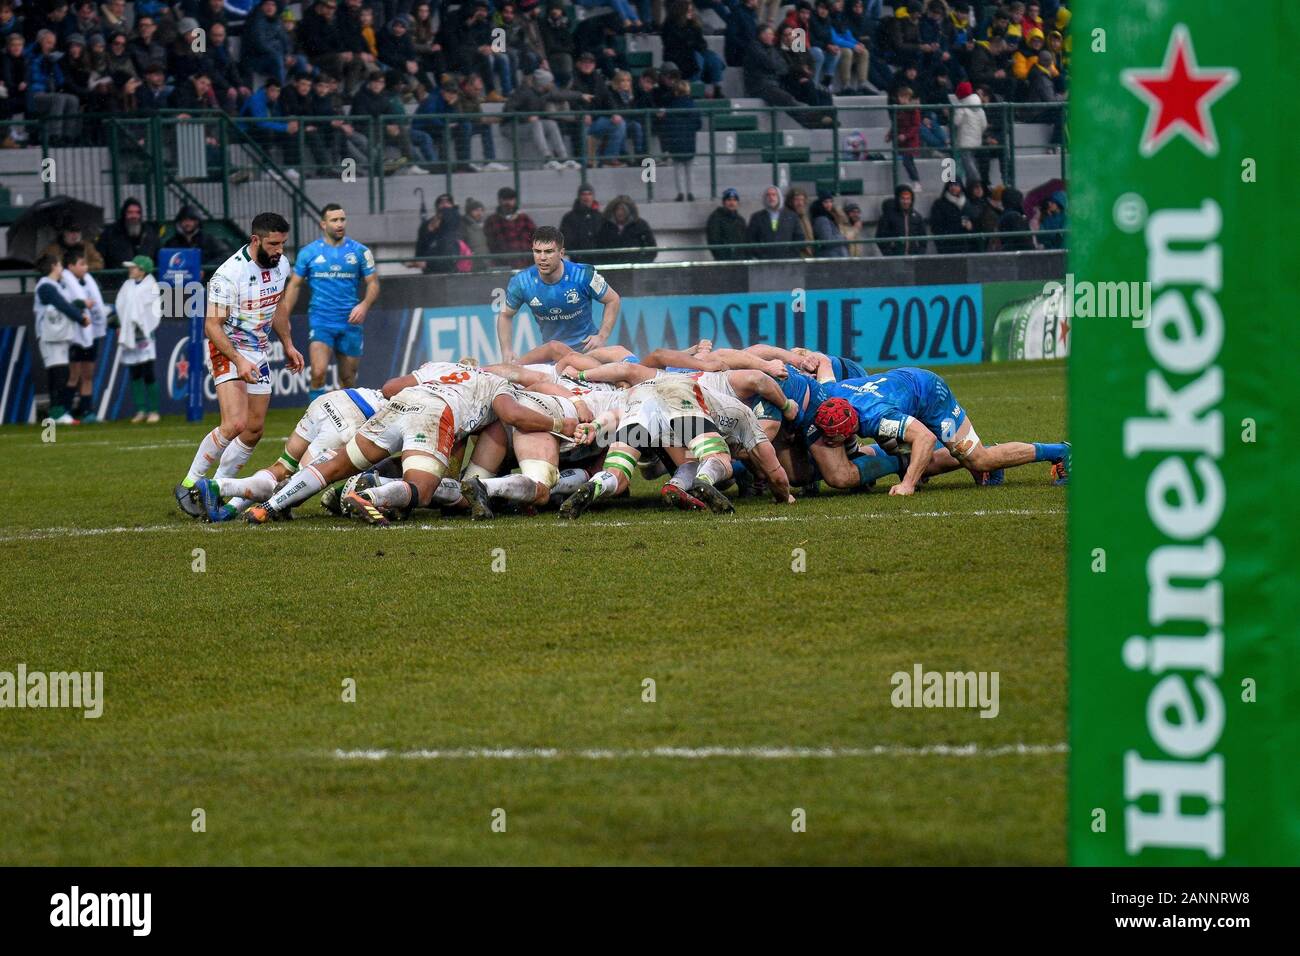 Treviso, Italy. 18th Jan, 2020. Treviso, Italy, 18 Jan 2020, scrum during Benetton Treviso vs Leinster Rugby - Rugby Heineken Champions Cup - Credit: LM/Ettore Griffoni Credit: Ettore Griffoni/LPS/ZUMA Wire/Alamy Live News Stock Photo